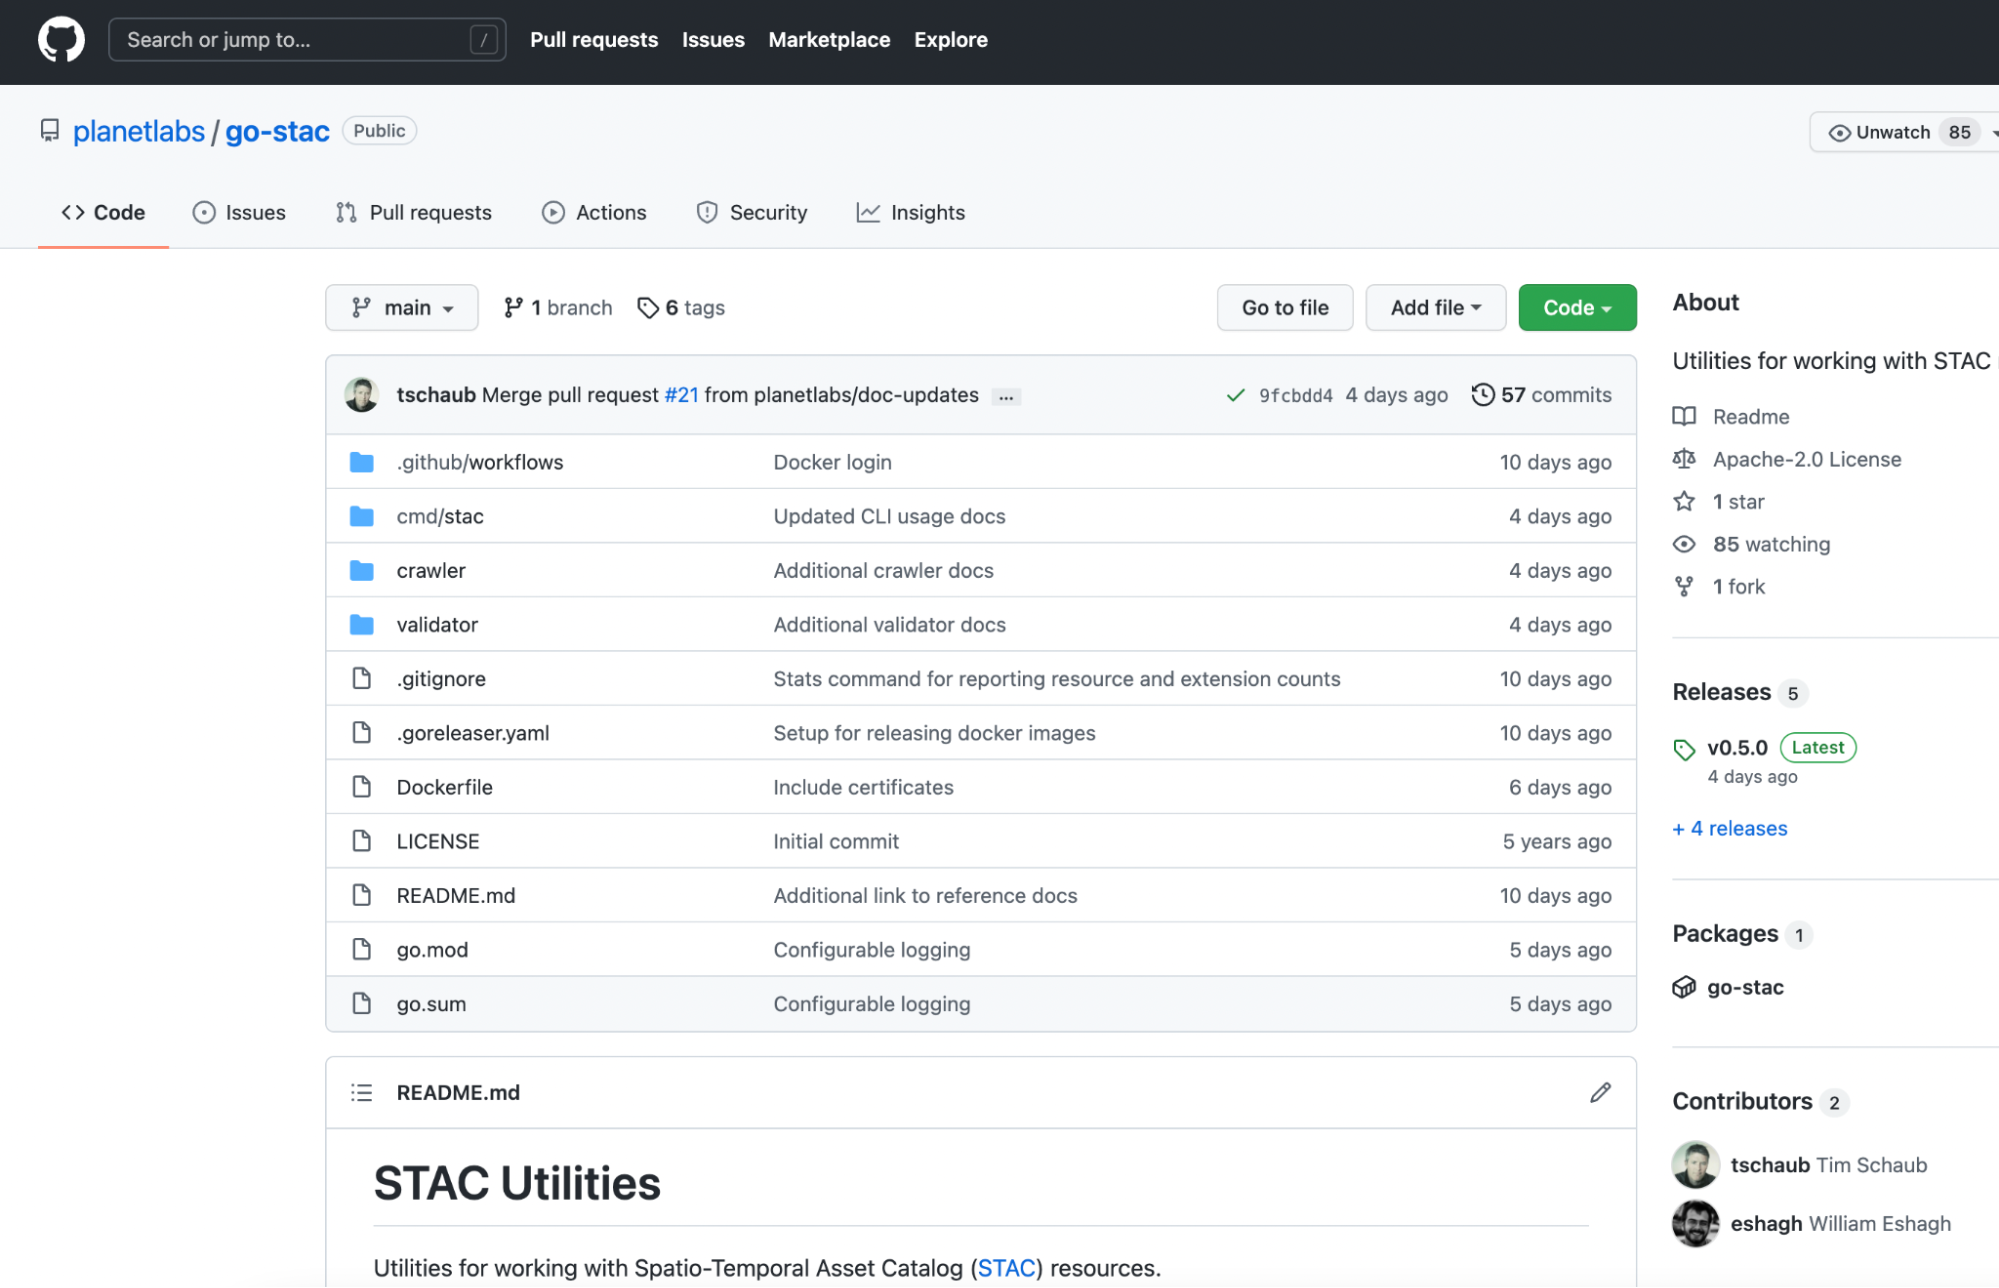 Planet Labs GitHub repository for the go-STAC utilities for working with Spatio-Temporal Asset Catalog (STAC) resources.